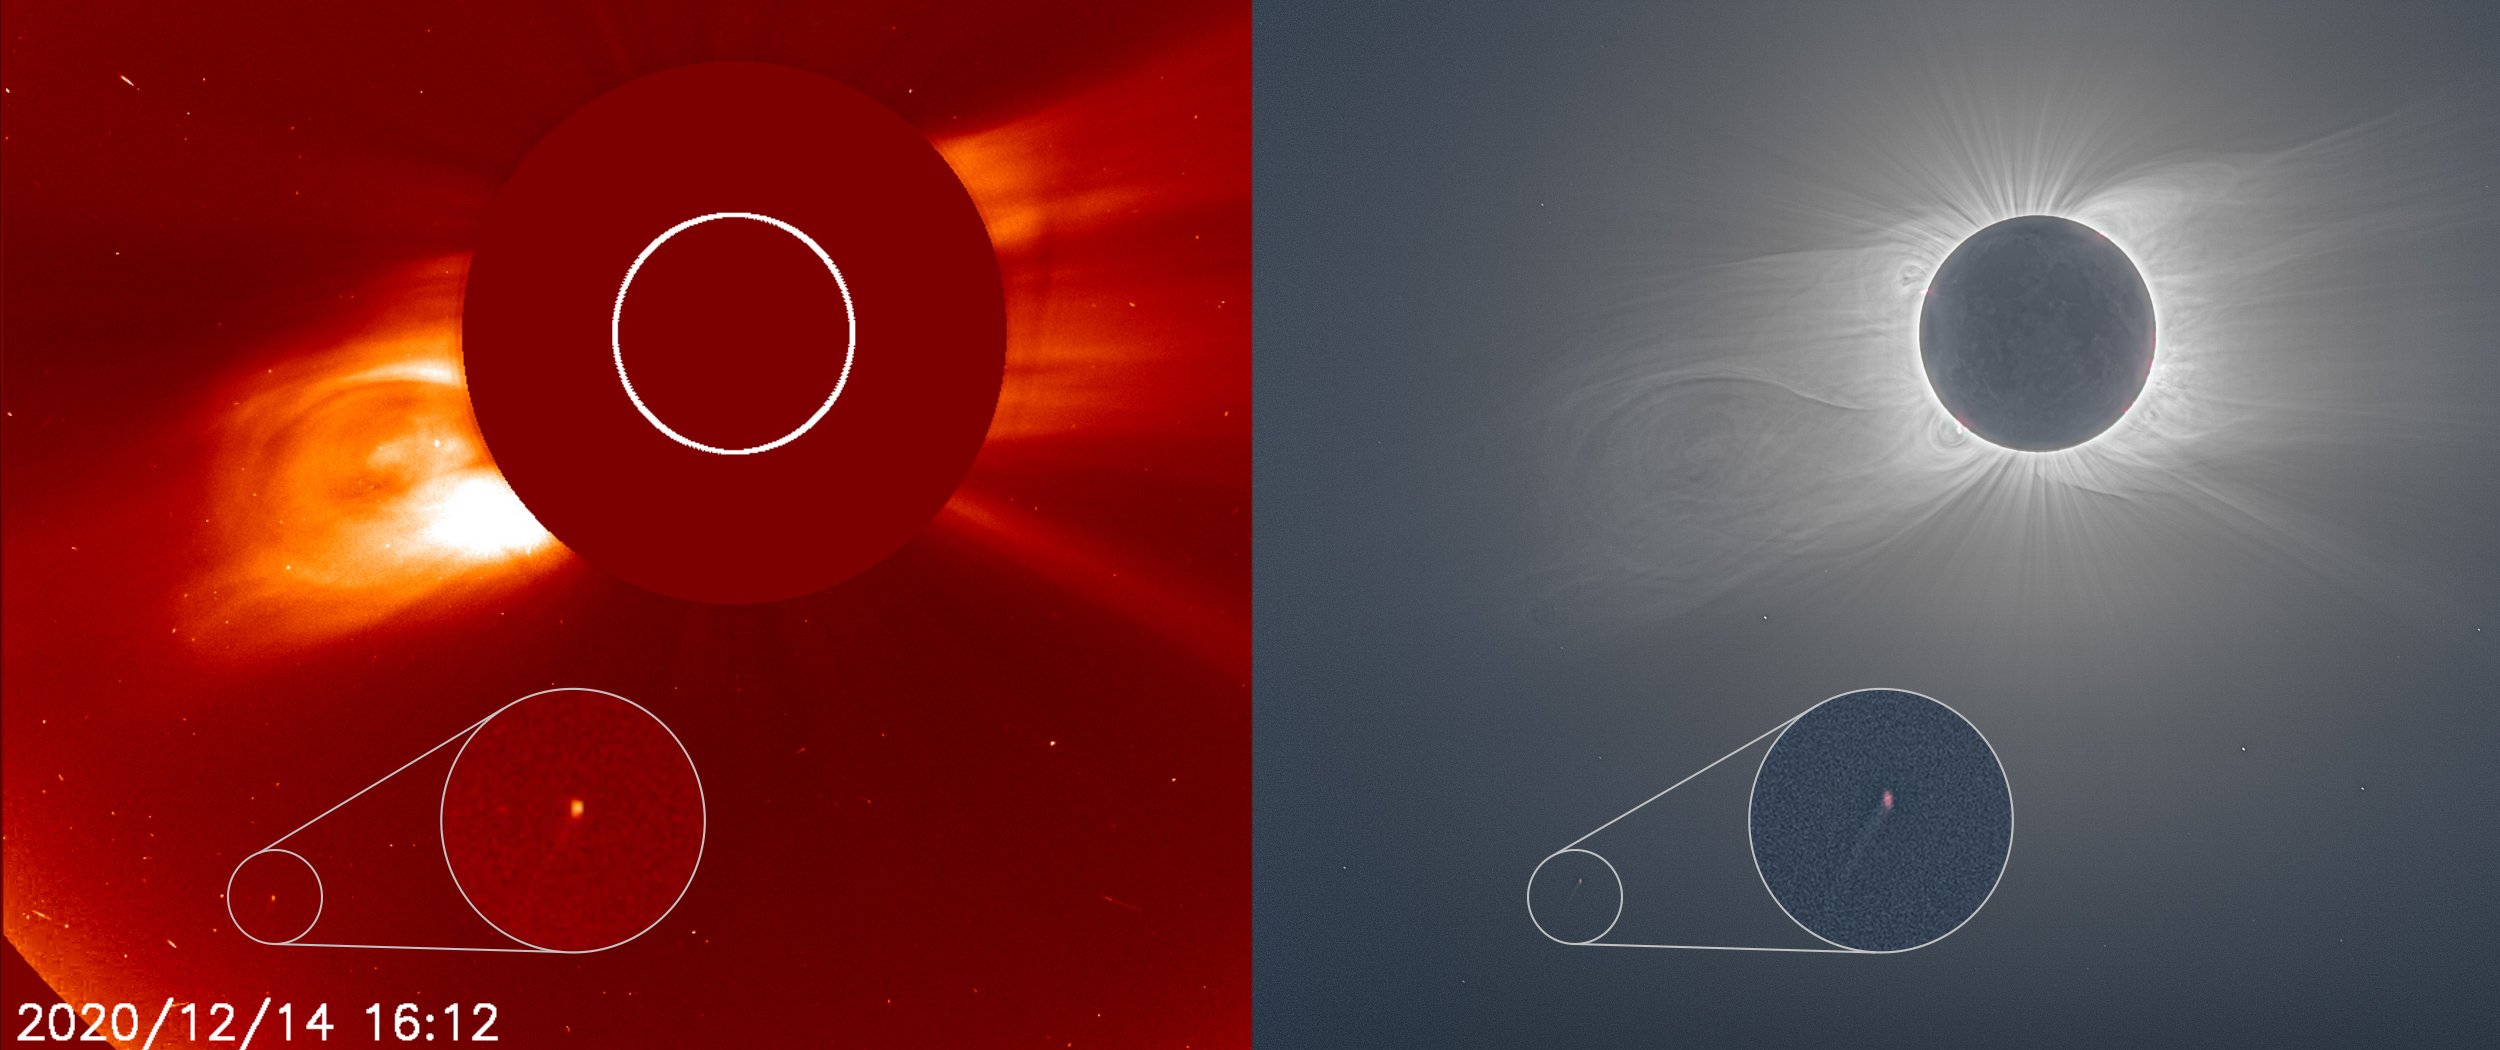 two side by side images showing a comet close to the sun, the image on the right shows the sun's corona shining brightly during the total solar eclipse.